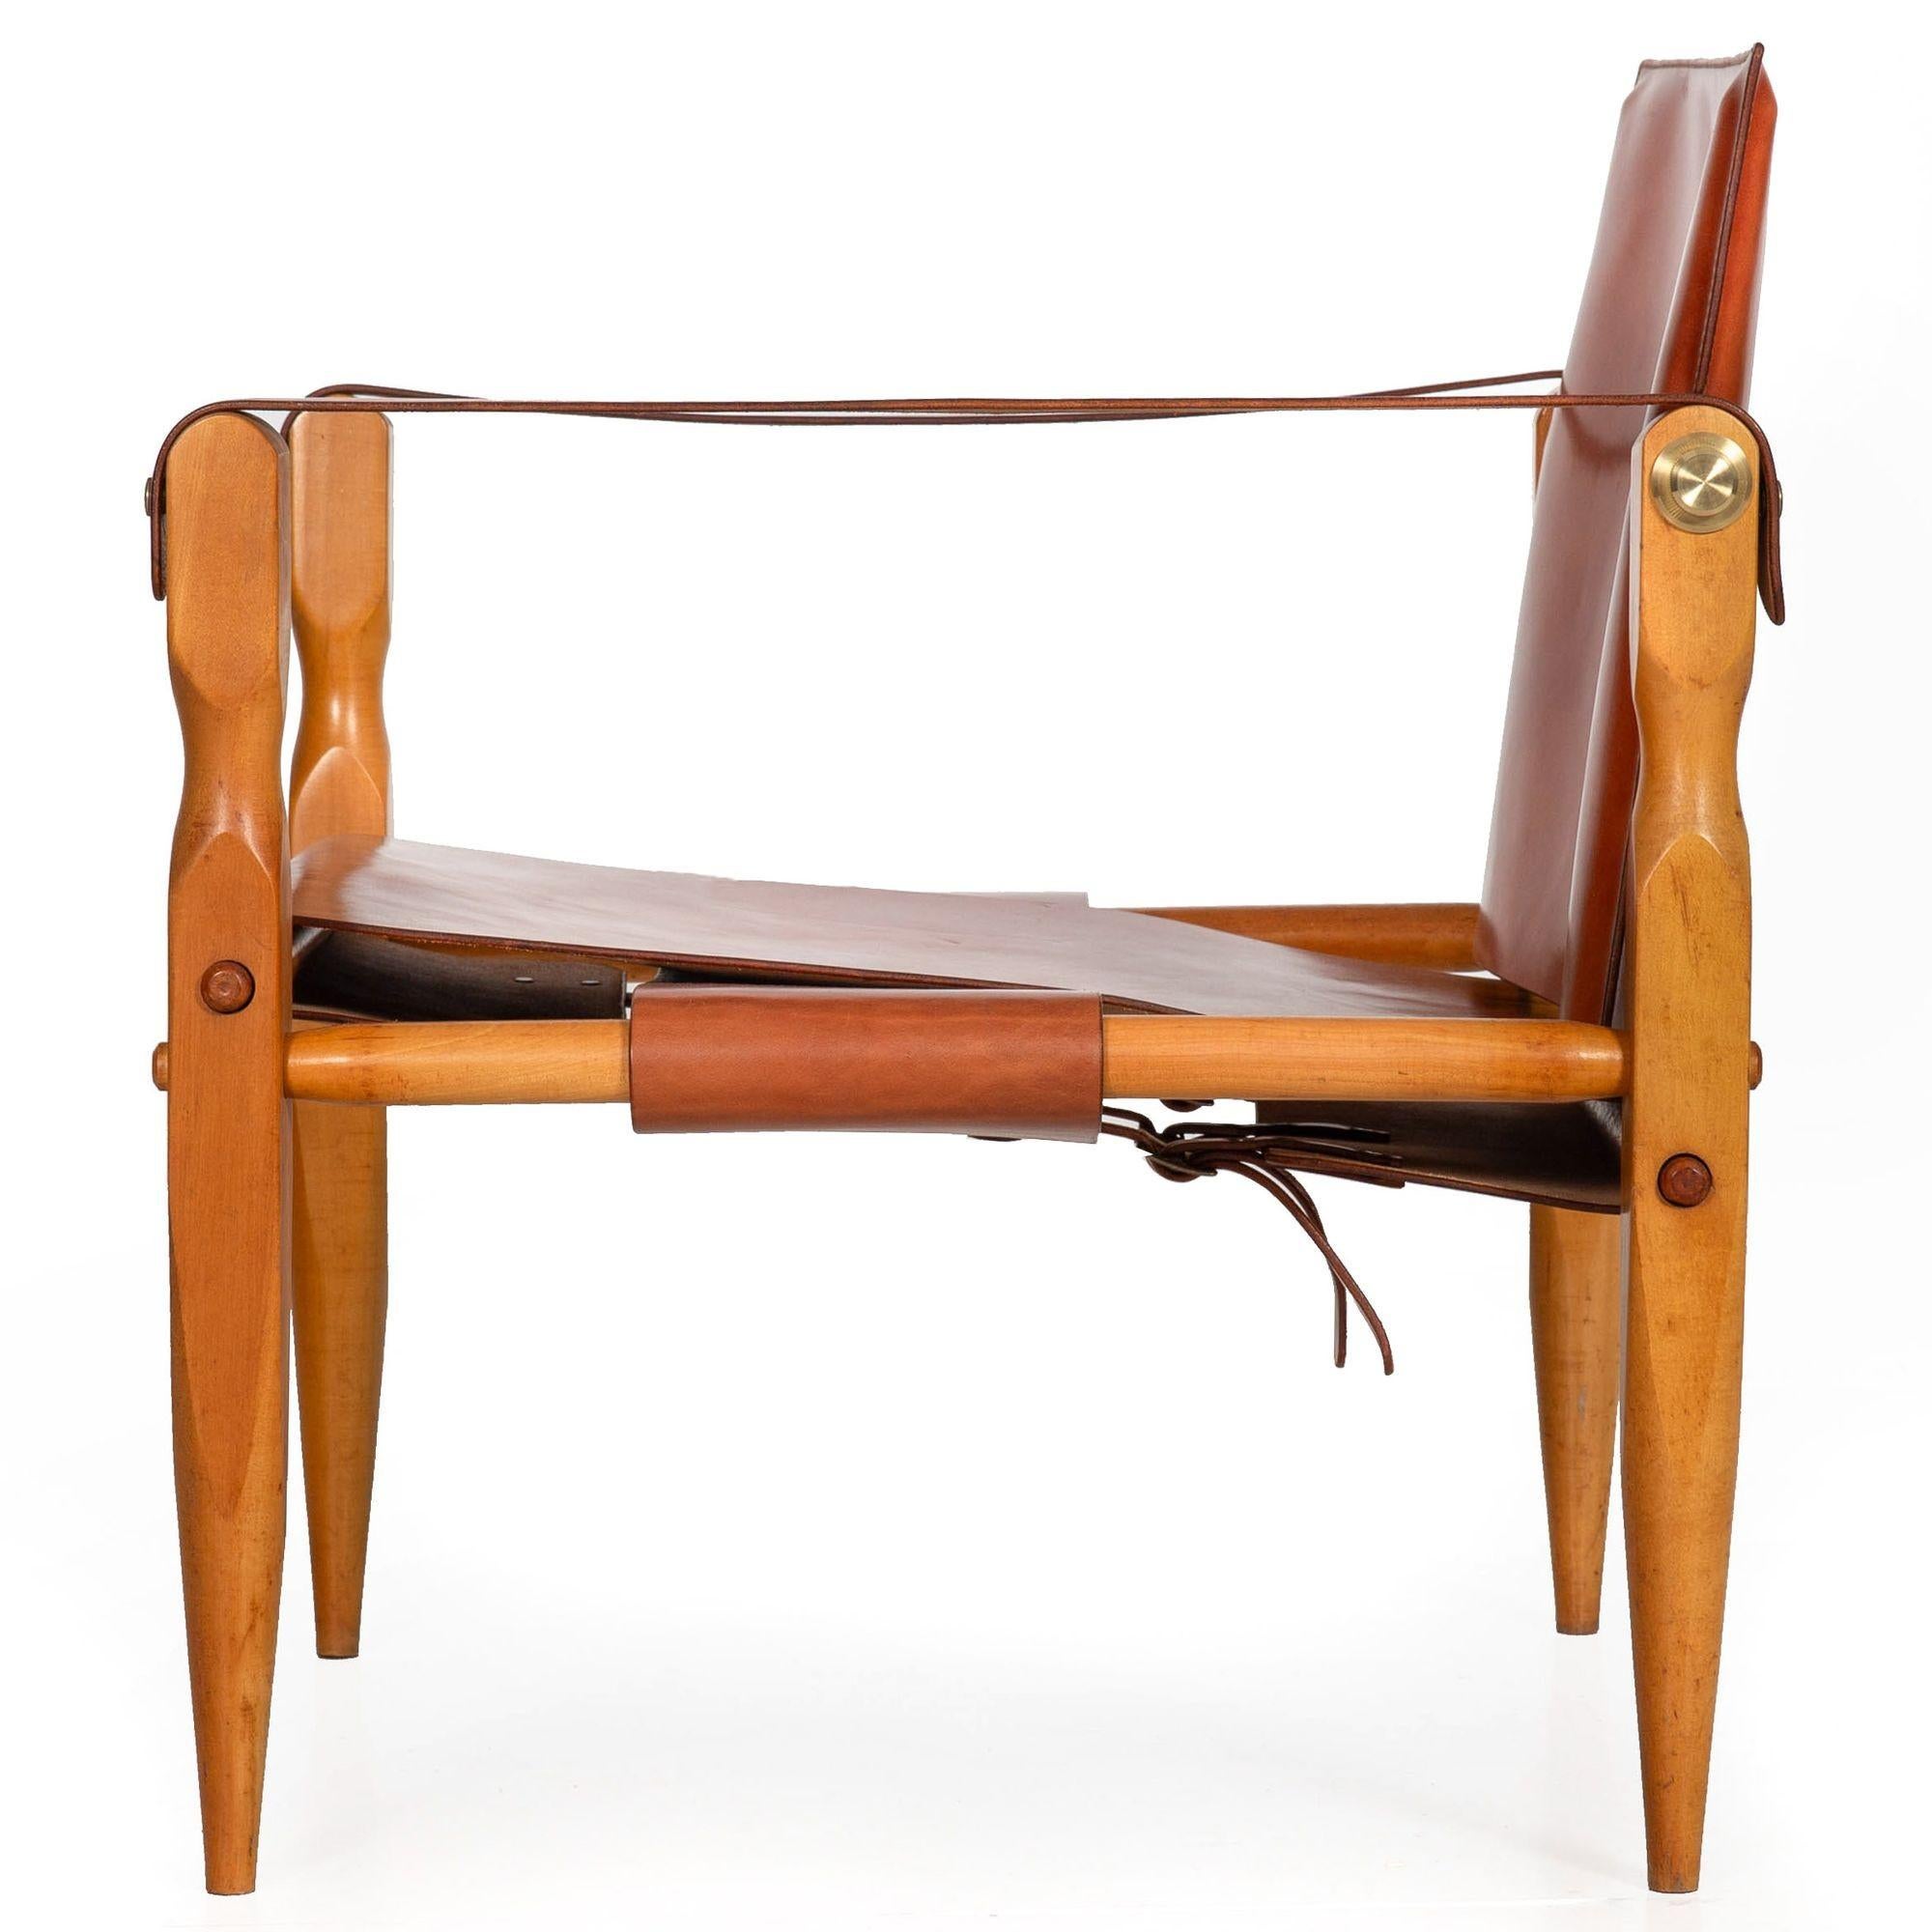 20th Century Gorgeous Circa 1970s Mid-Century Modern “Safari” Chair in New Leather For Sale